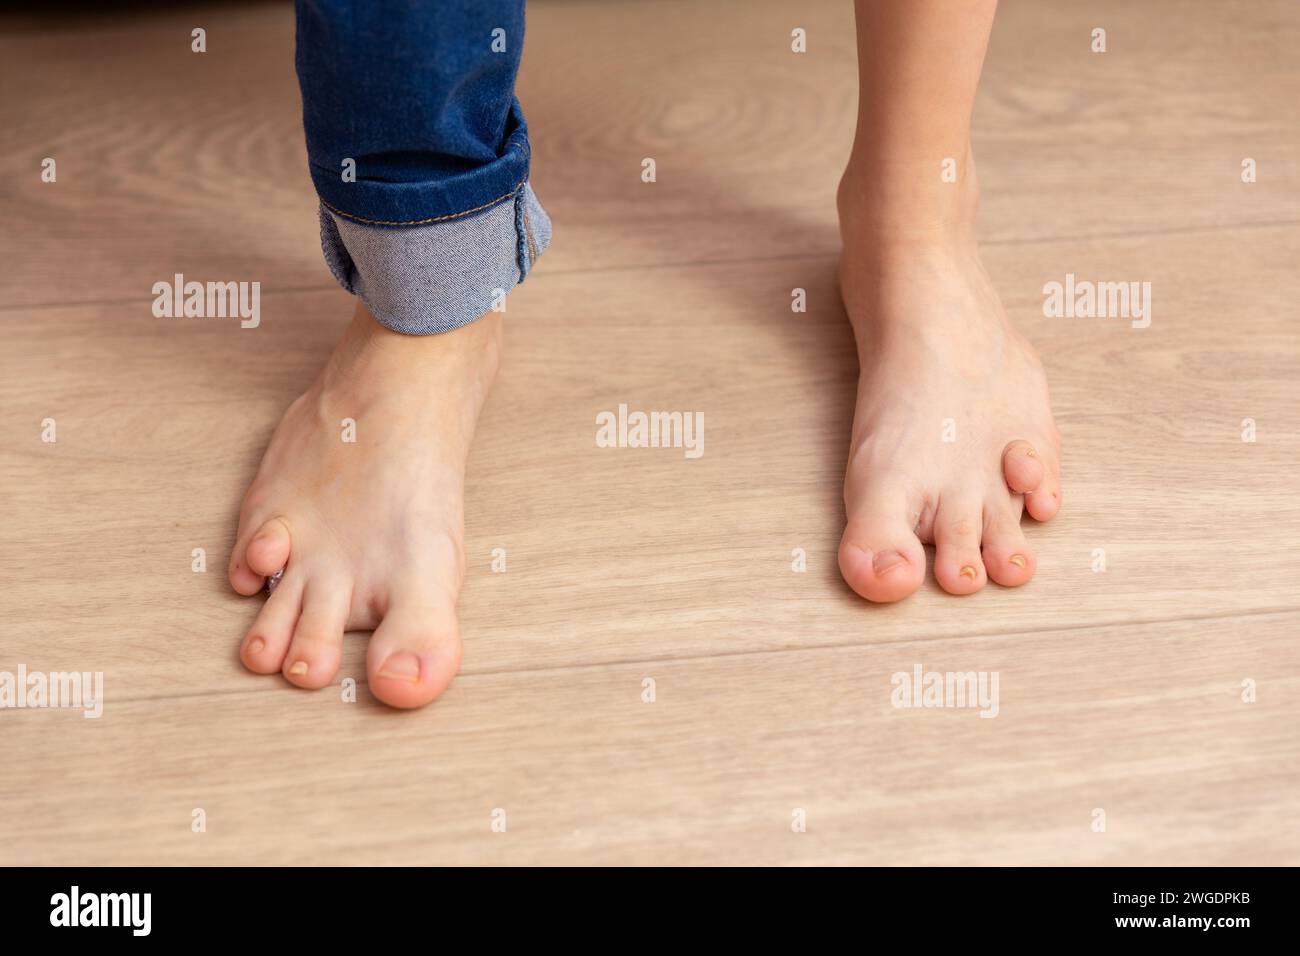 Close-up of the feet of a thirteen-year-old girl with a birth defect. Disability prevents the girl from walking and developing normally. Stock Photo